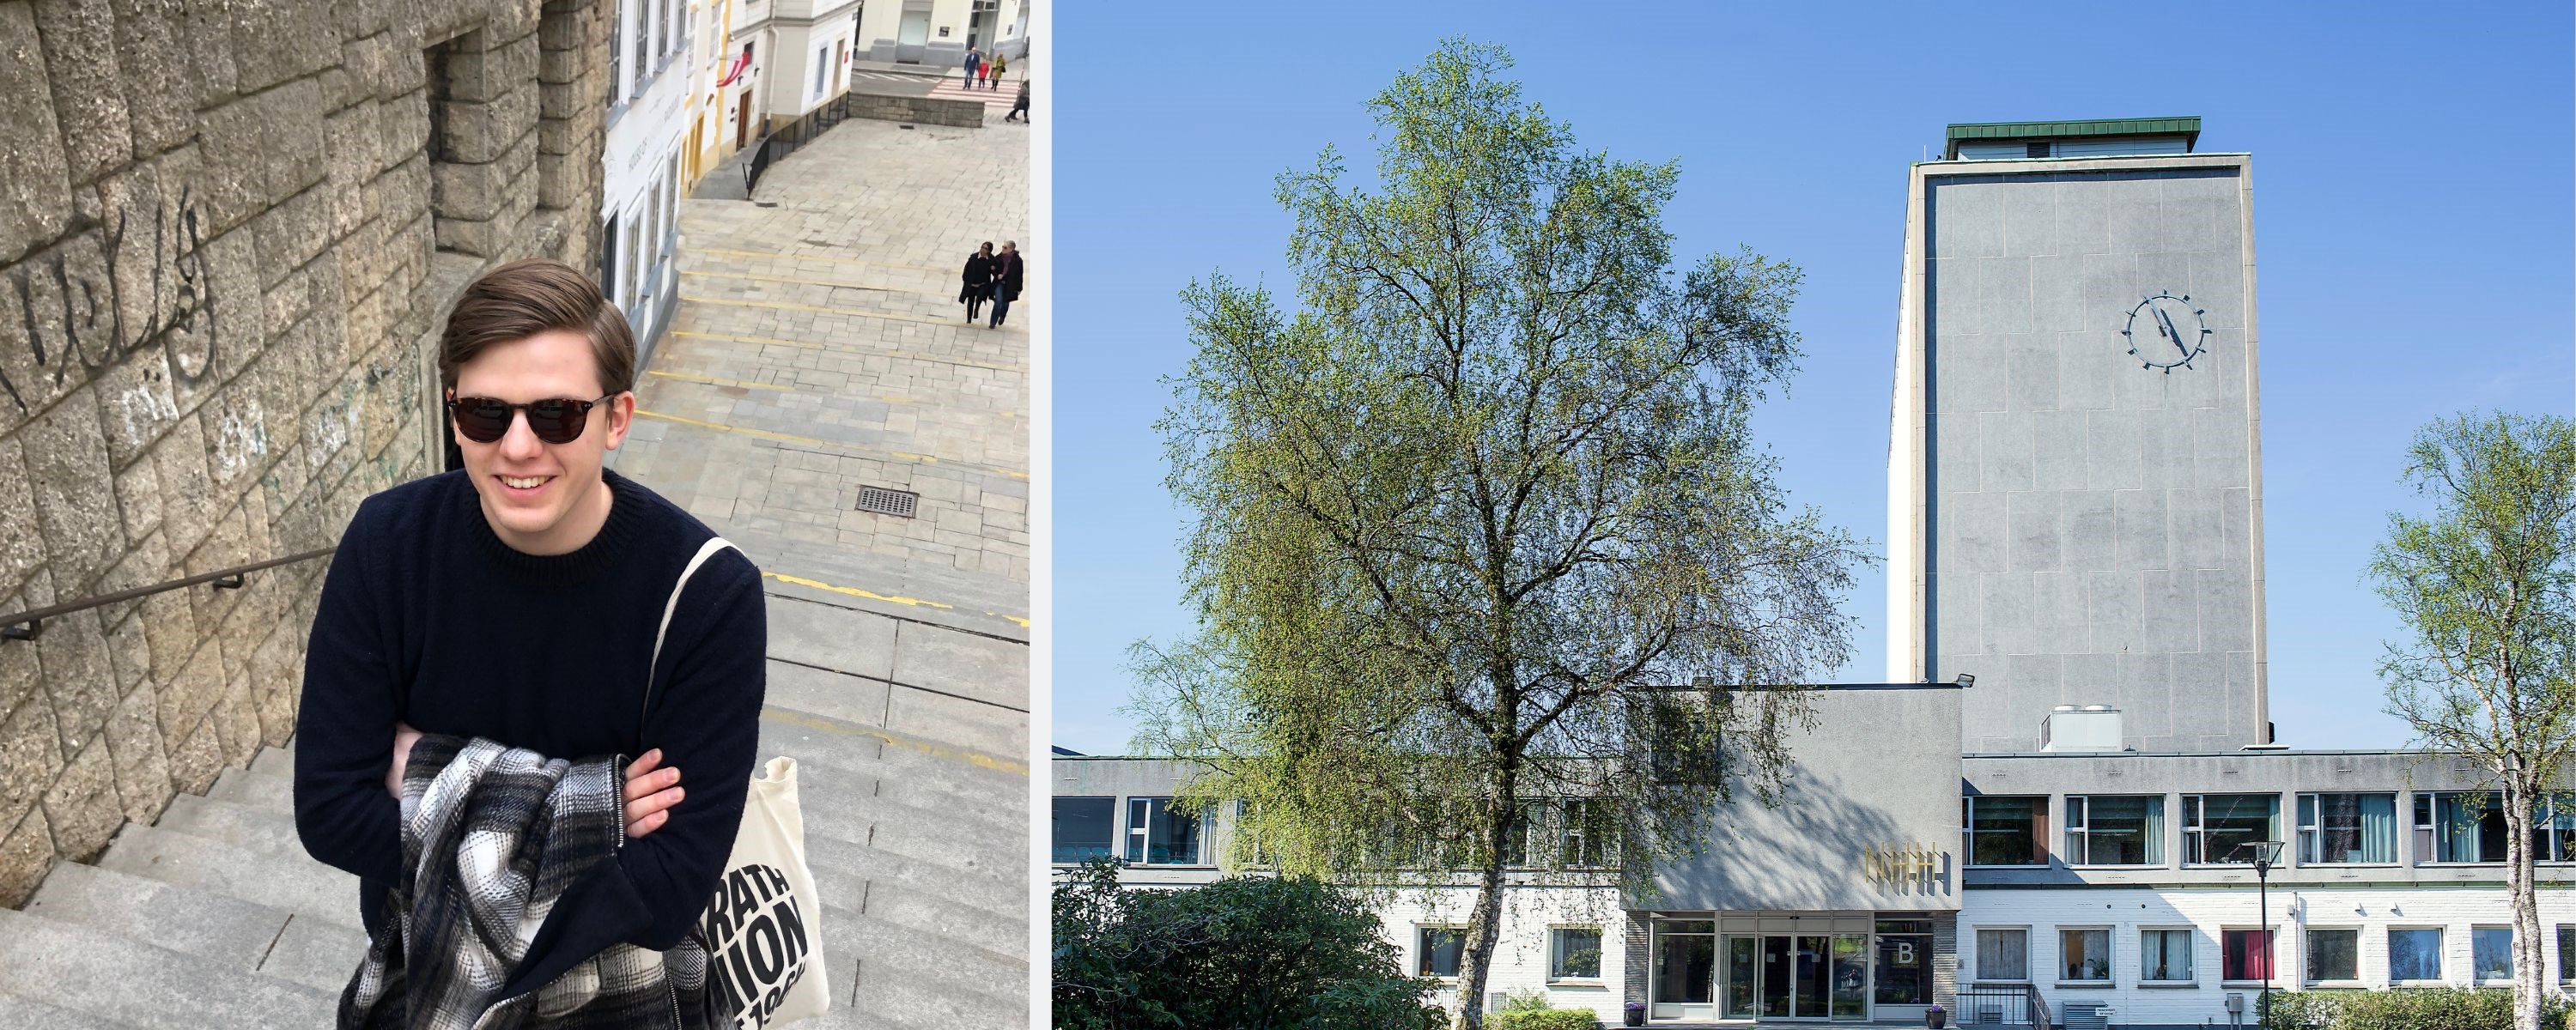 Picture of Mathias Ringstad and the NHH building. Photo: Silje Katrine Robinson / private